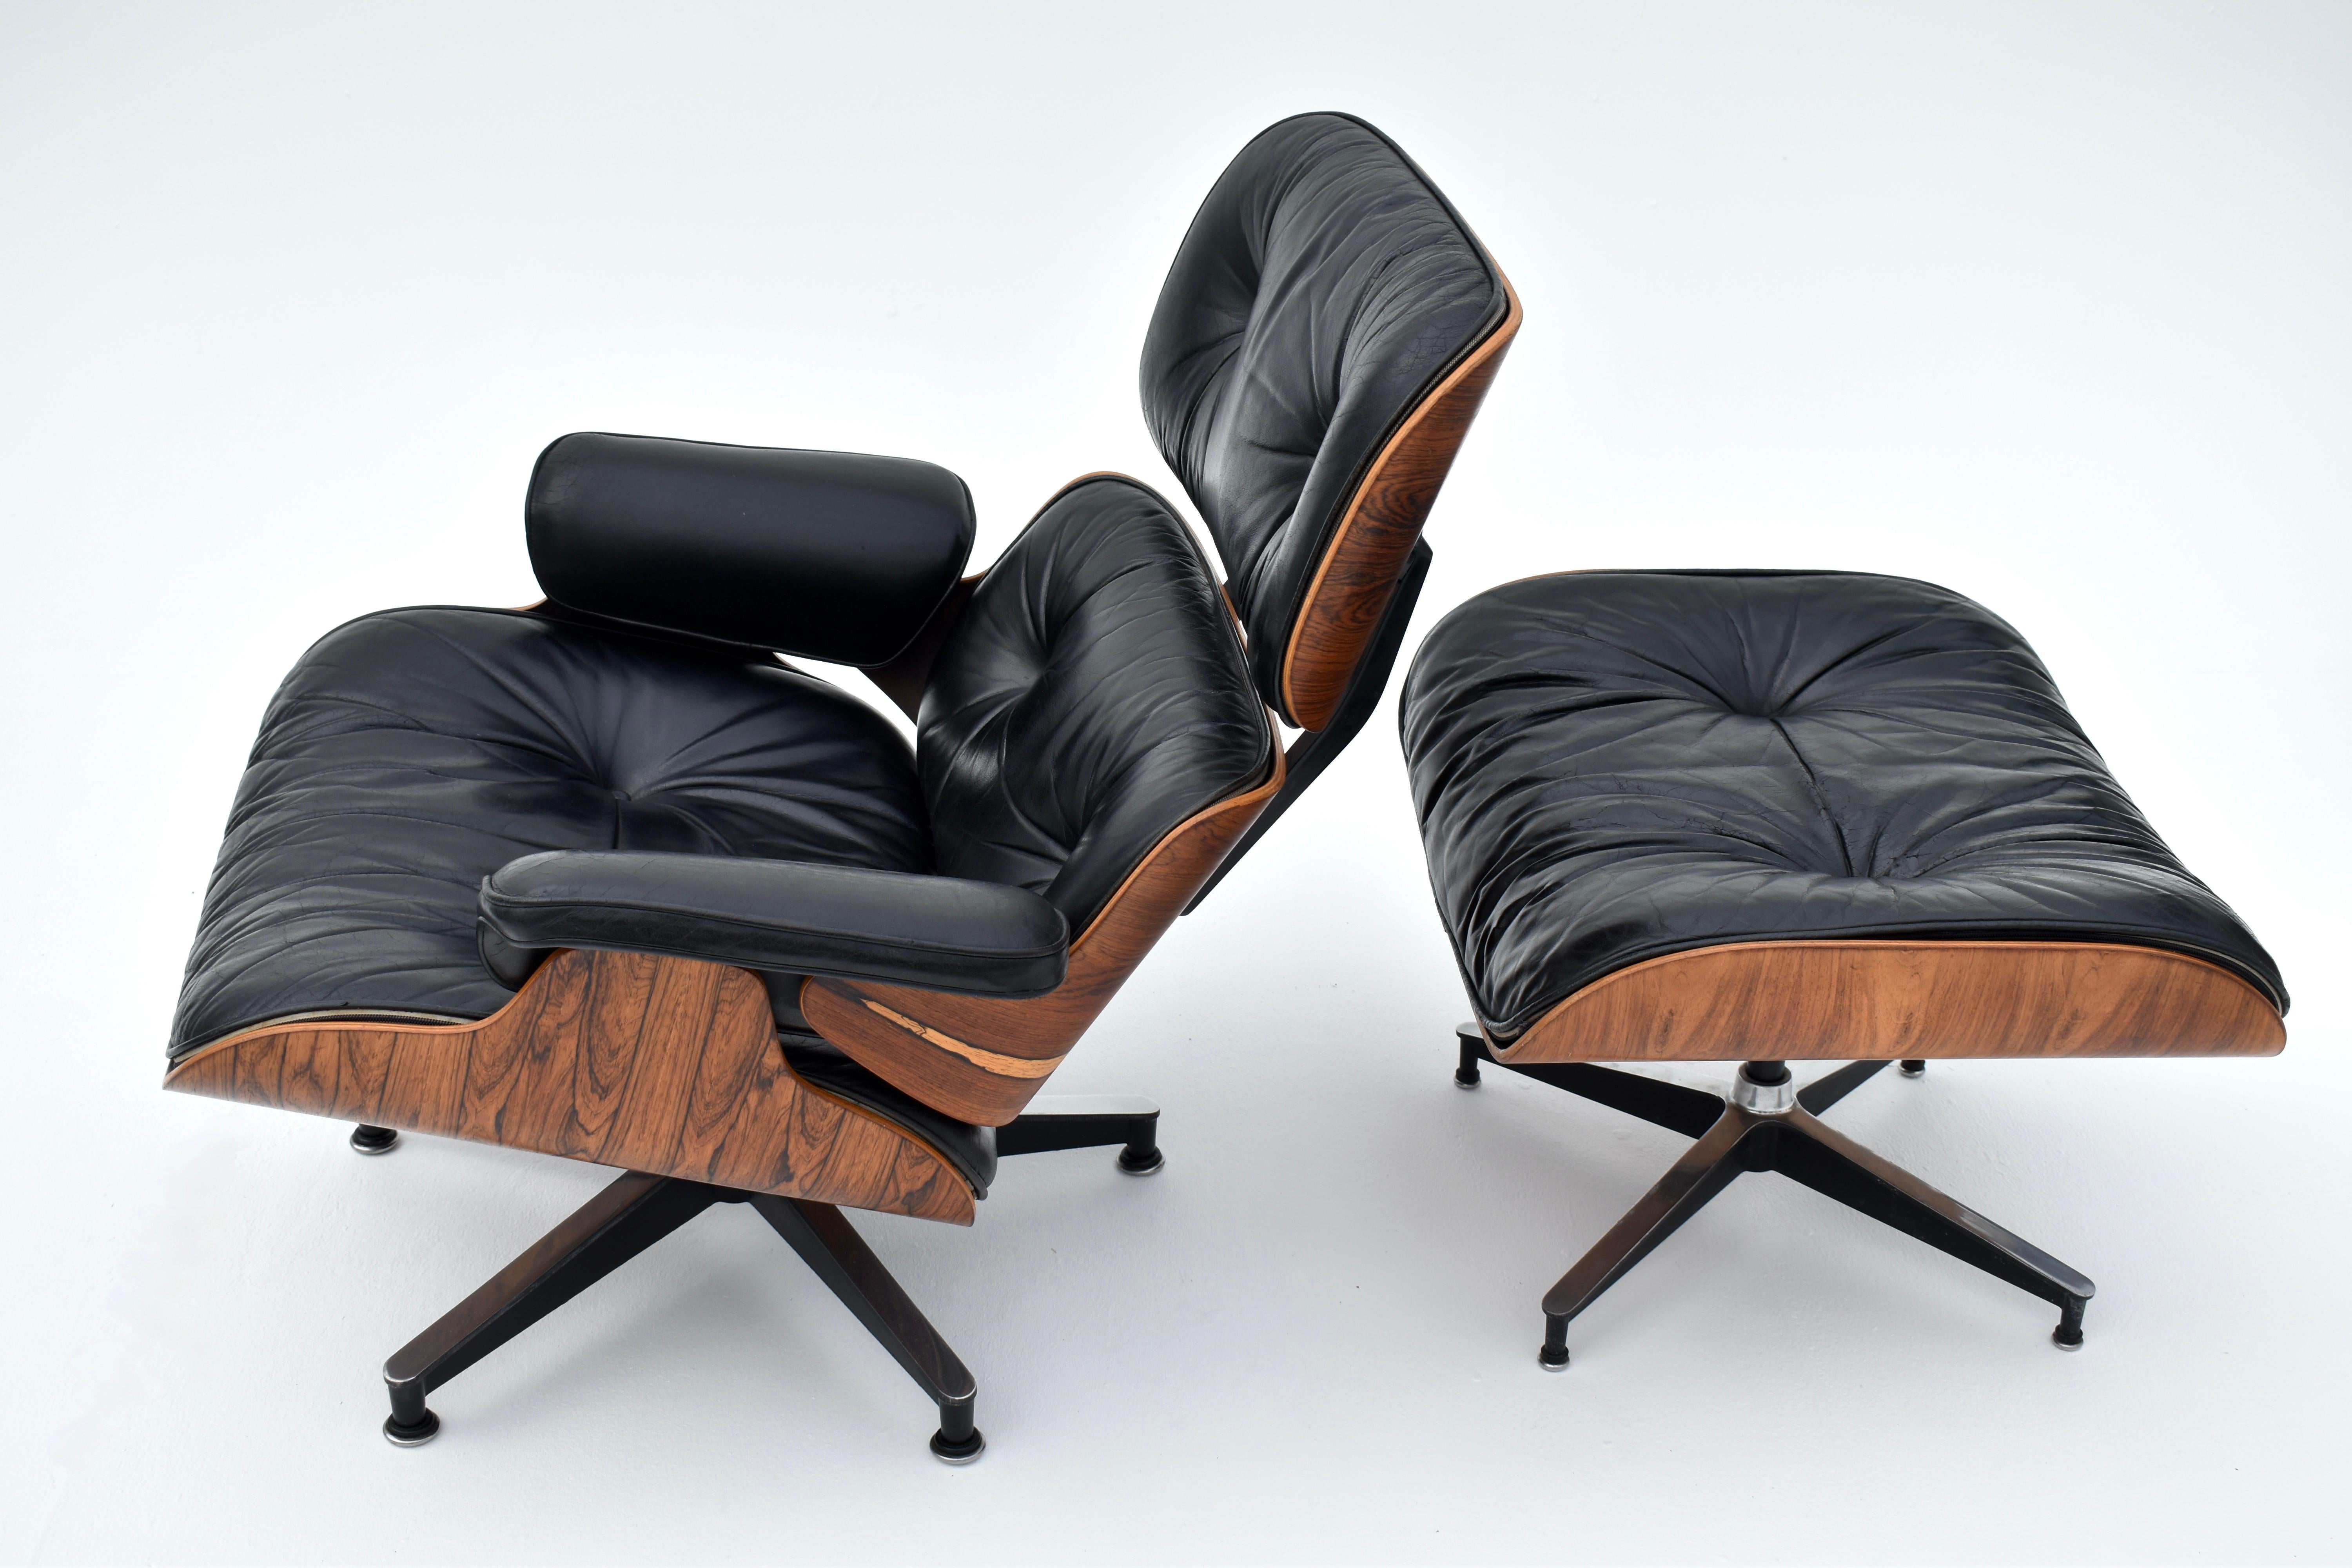 Mid-20th Century Original 1960's Production Eames Lounge Chair & Ottoman For Herman Miller